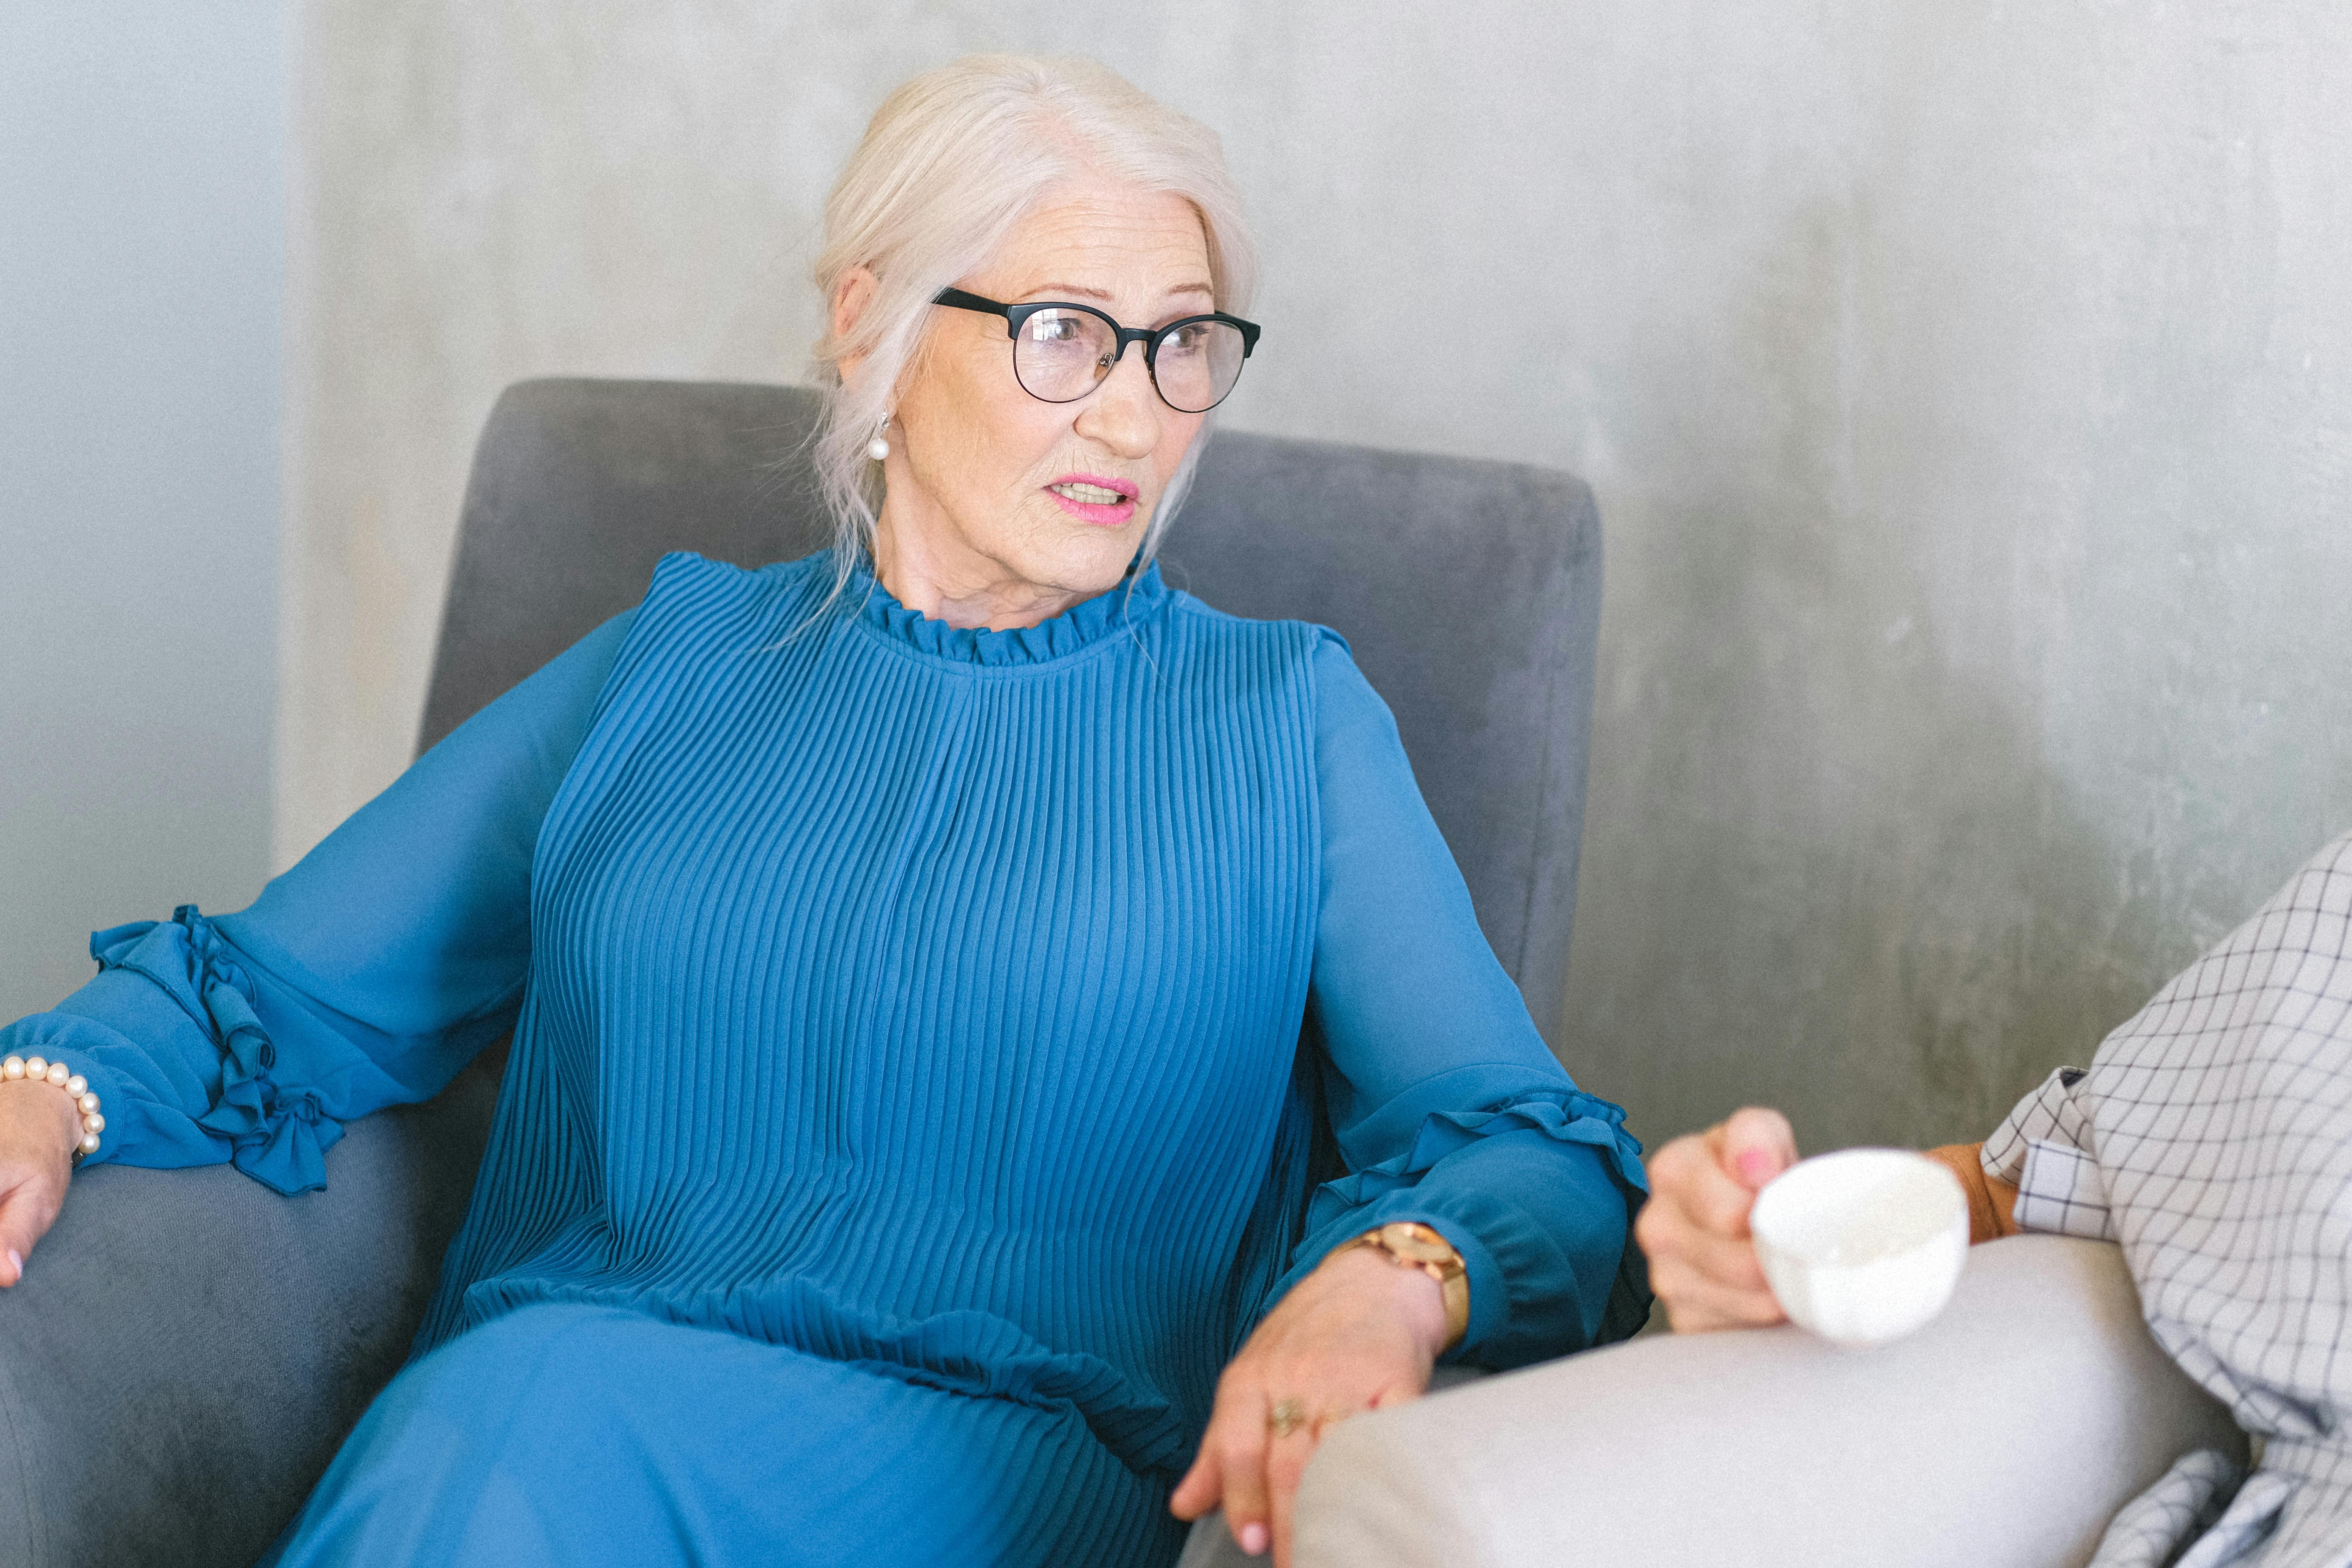 An unhappy older woman | Source: Pexels